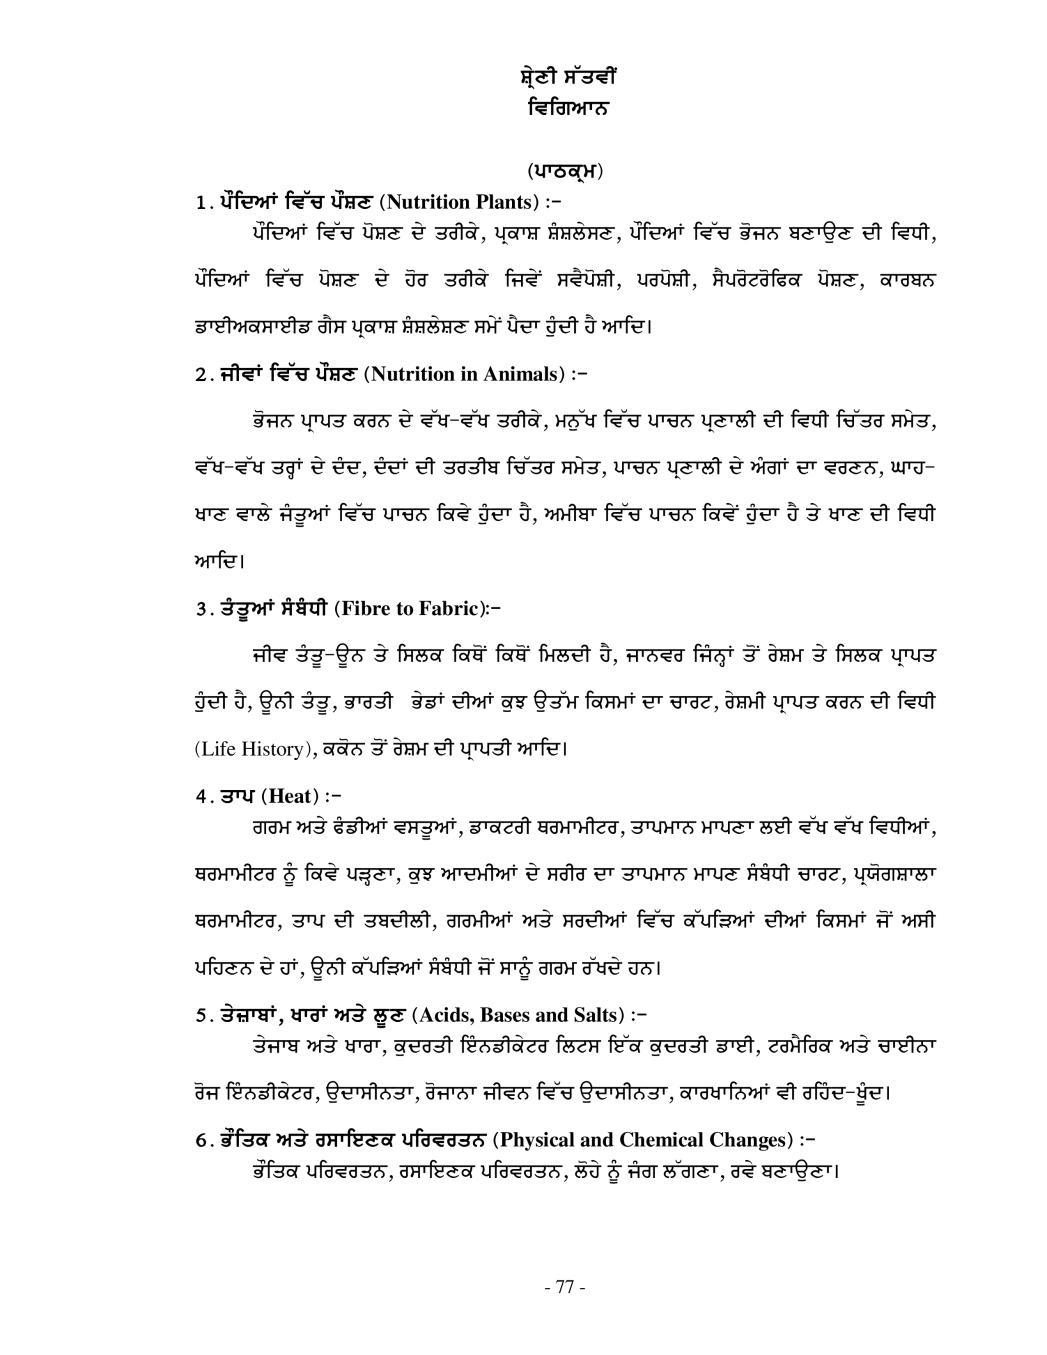 PSEB Syllabus 2020-21 for Class 7 Science - Page 1